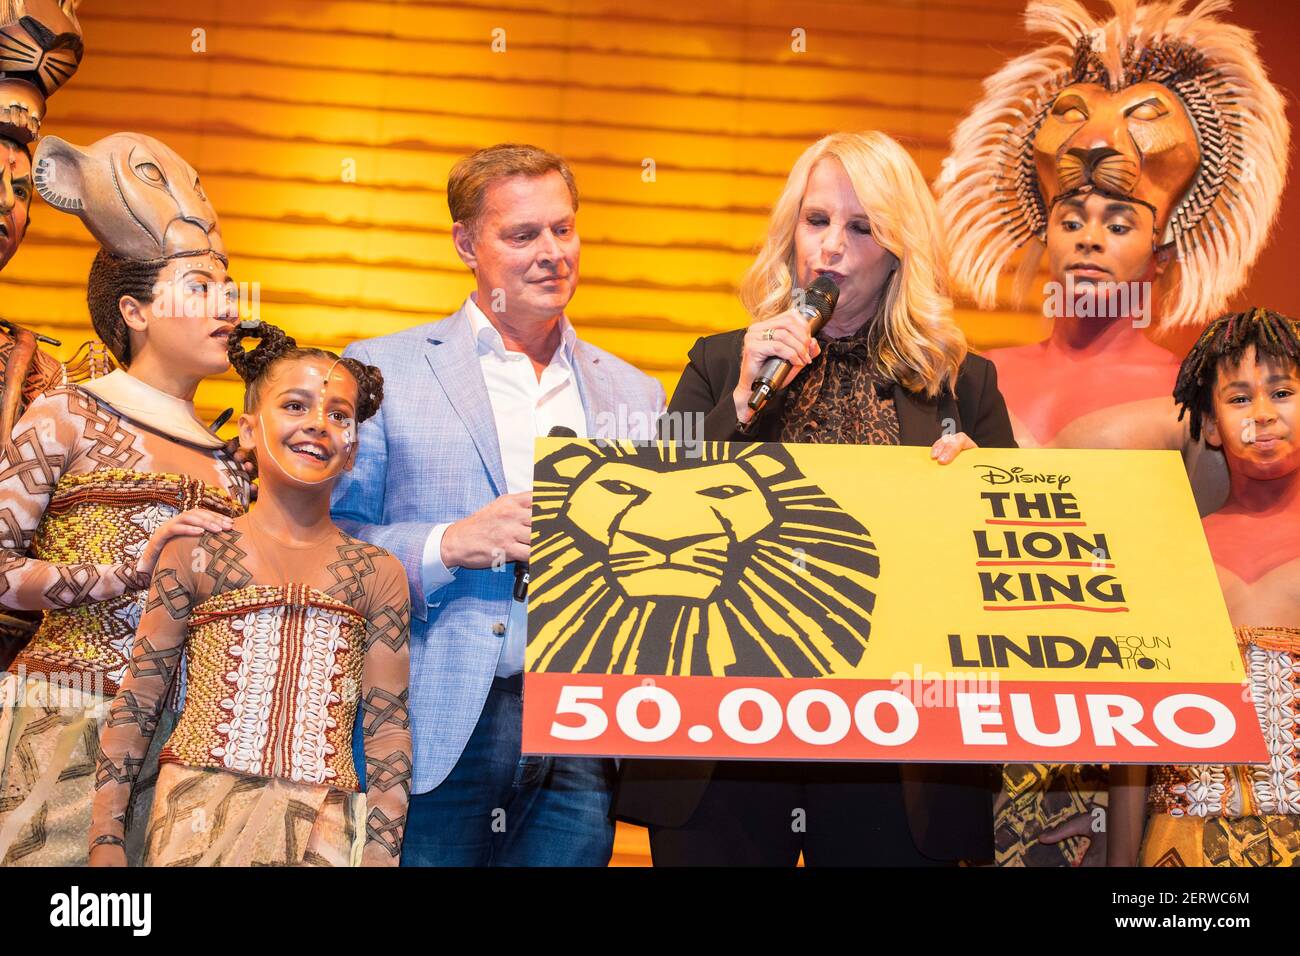 Albert Verlinde and Linda de Mol during the second anniversary of The Lion King at AFAS Circus Theater in Scheveningen, the LINDA.foundation by Linda Mol will receive a €50,000 checue. (